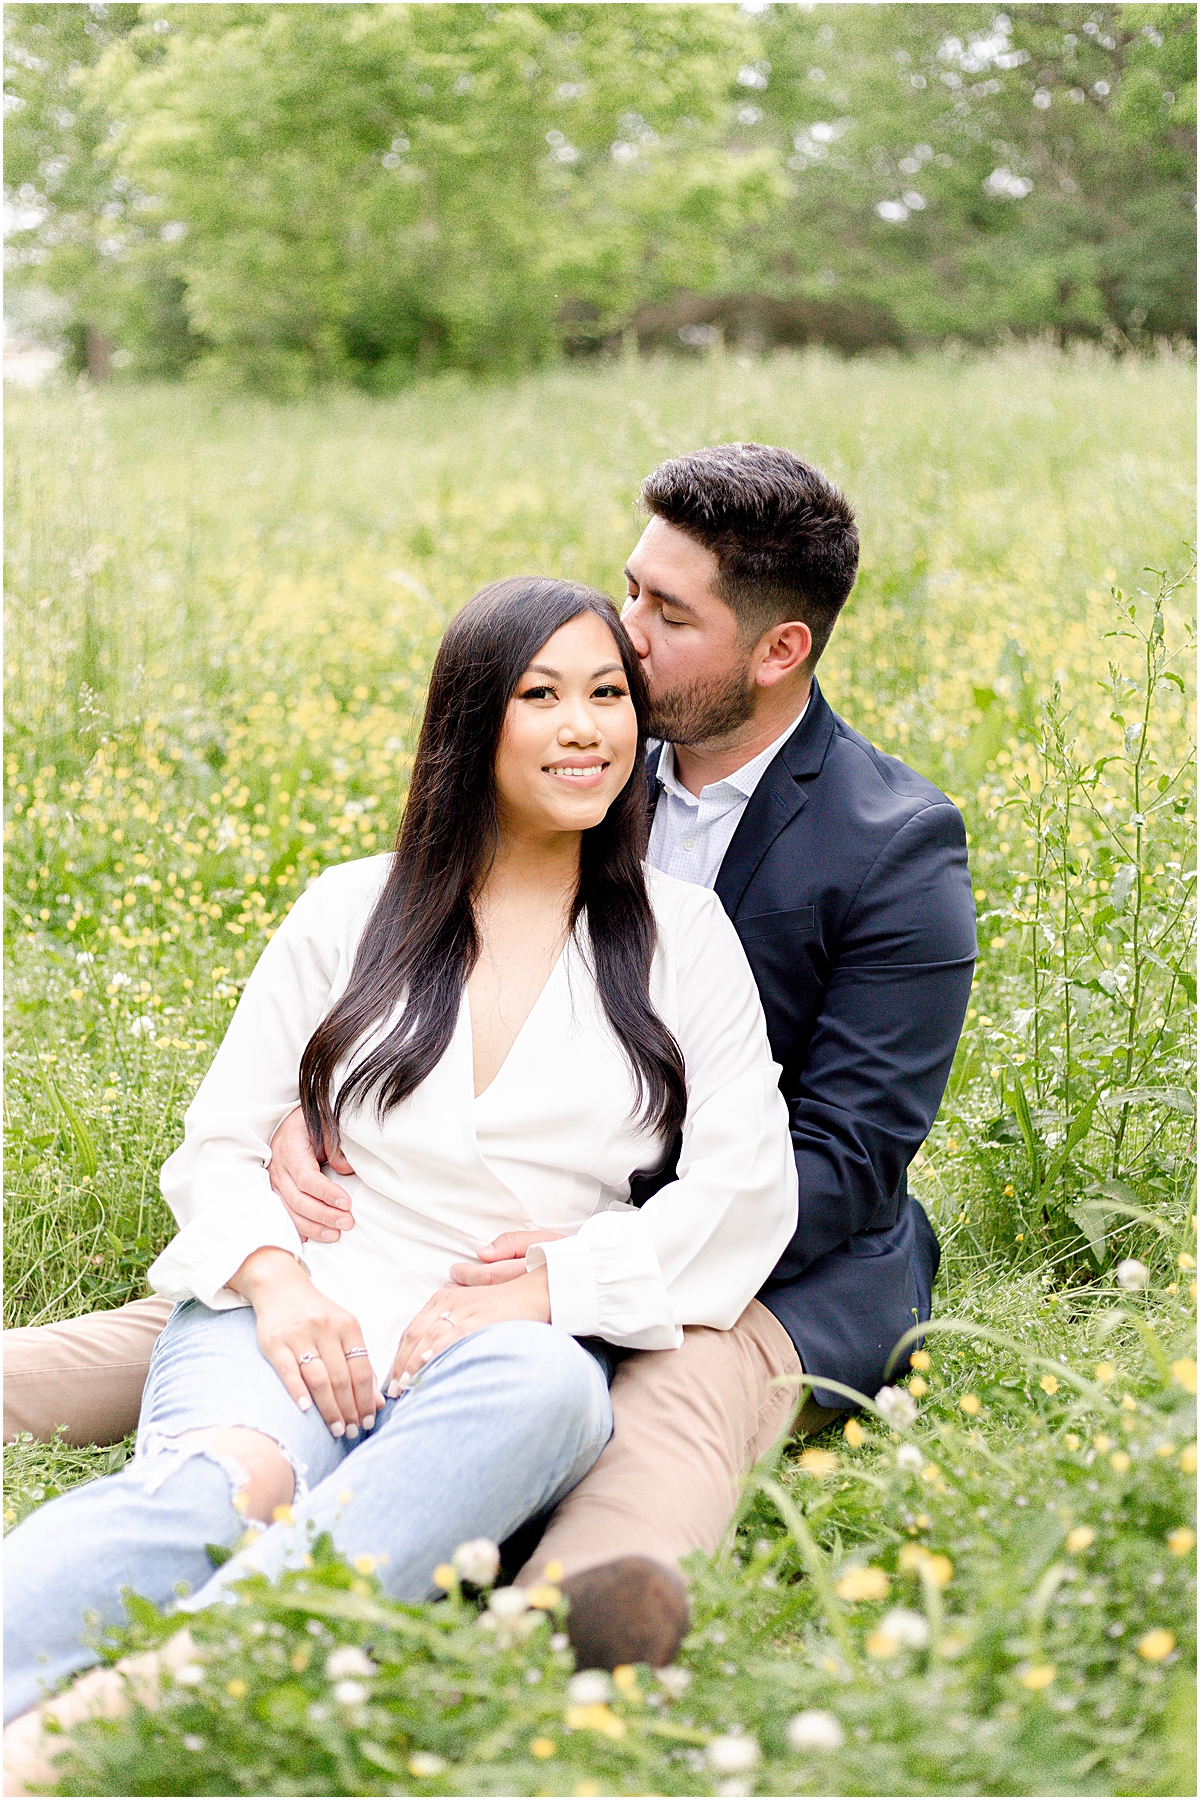 Man hissing a woman's hair in a field picture taken by Engagement Photographer